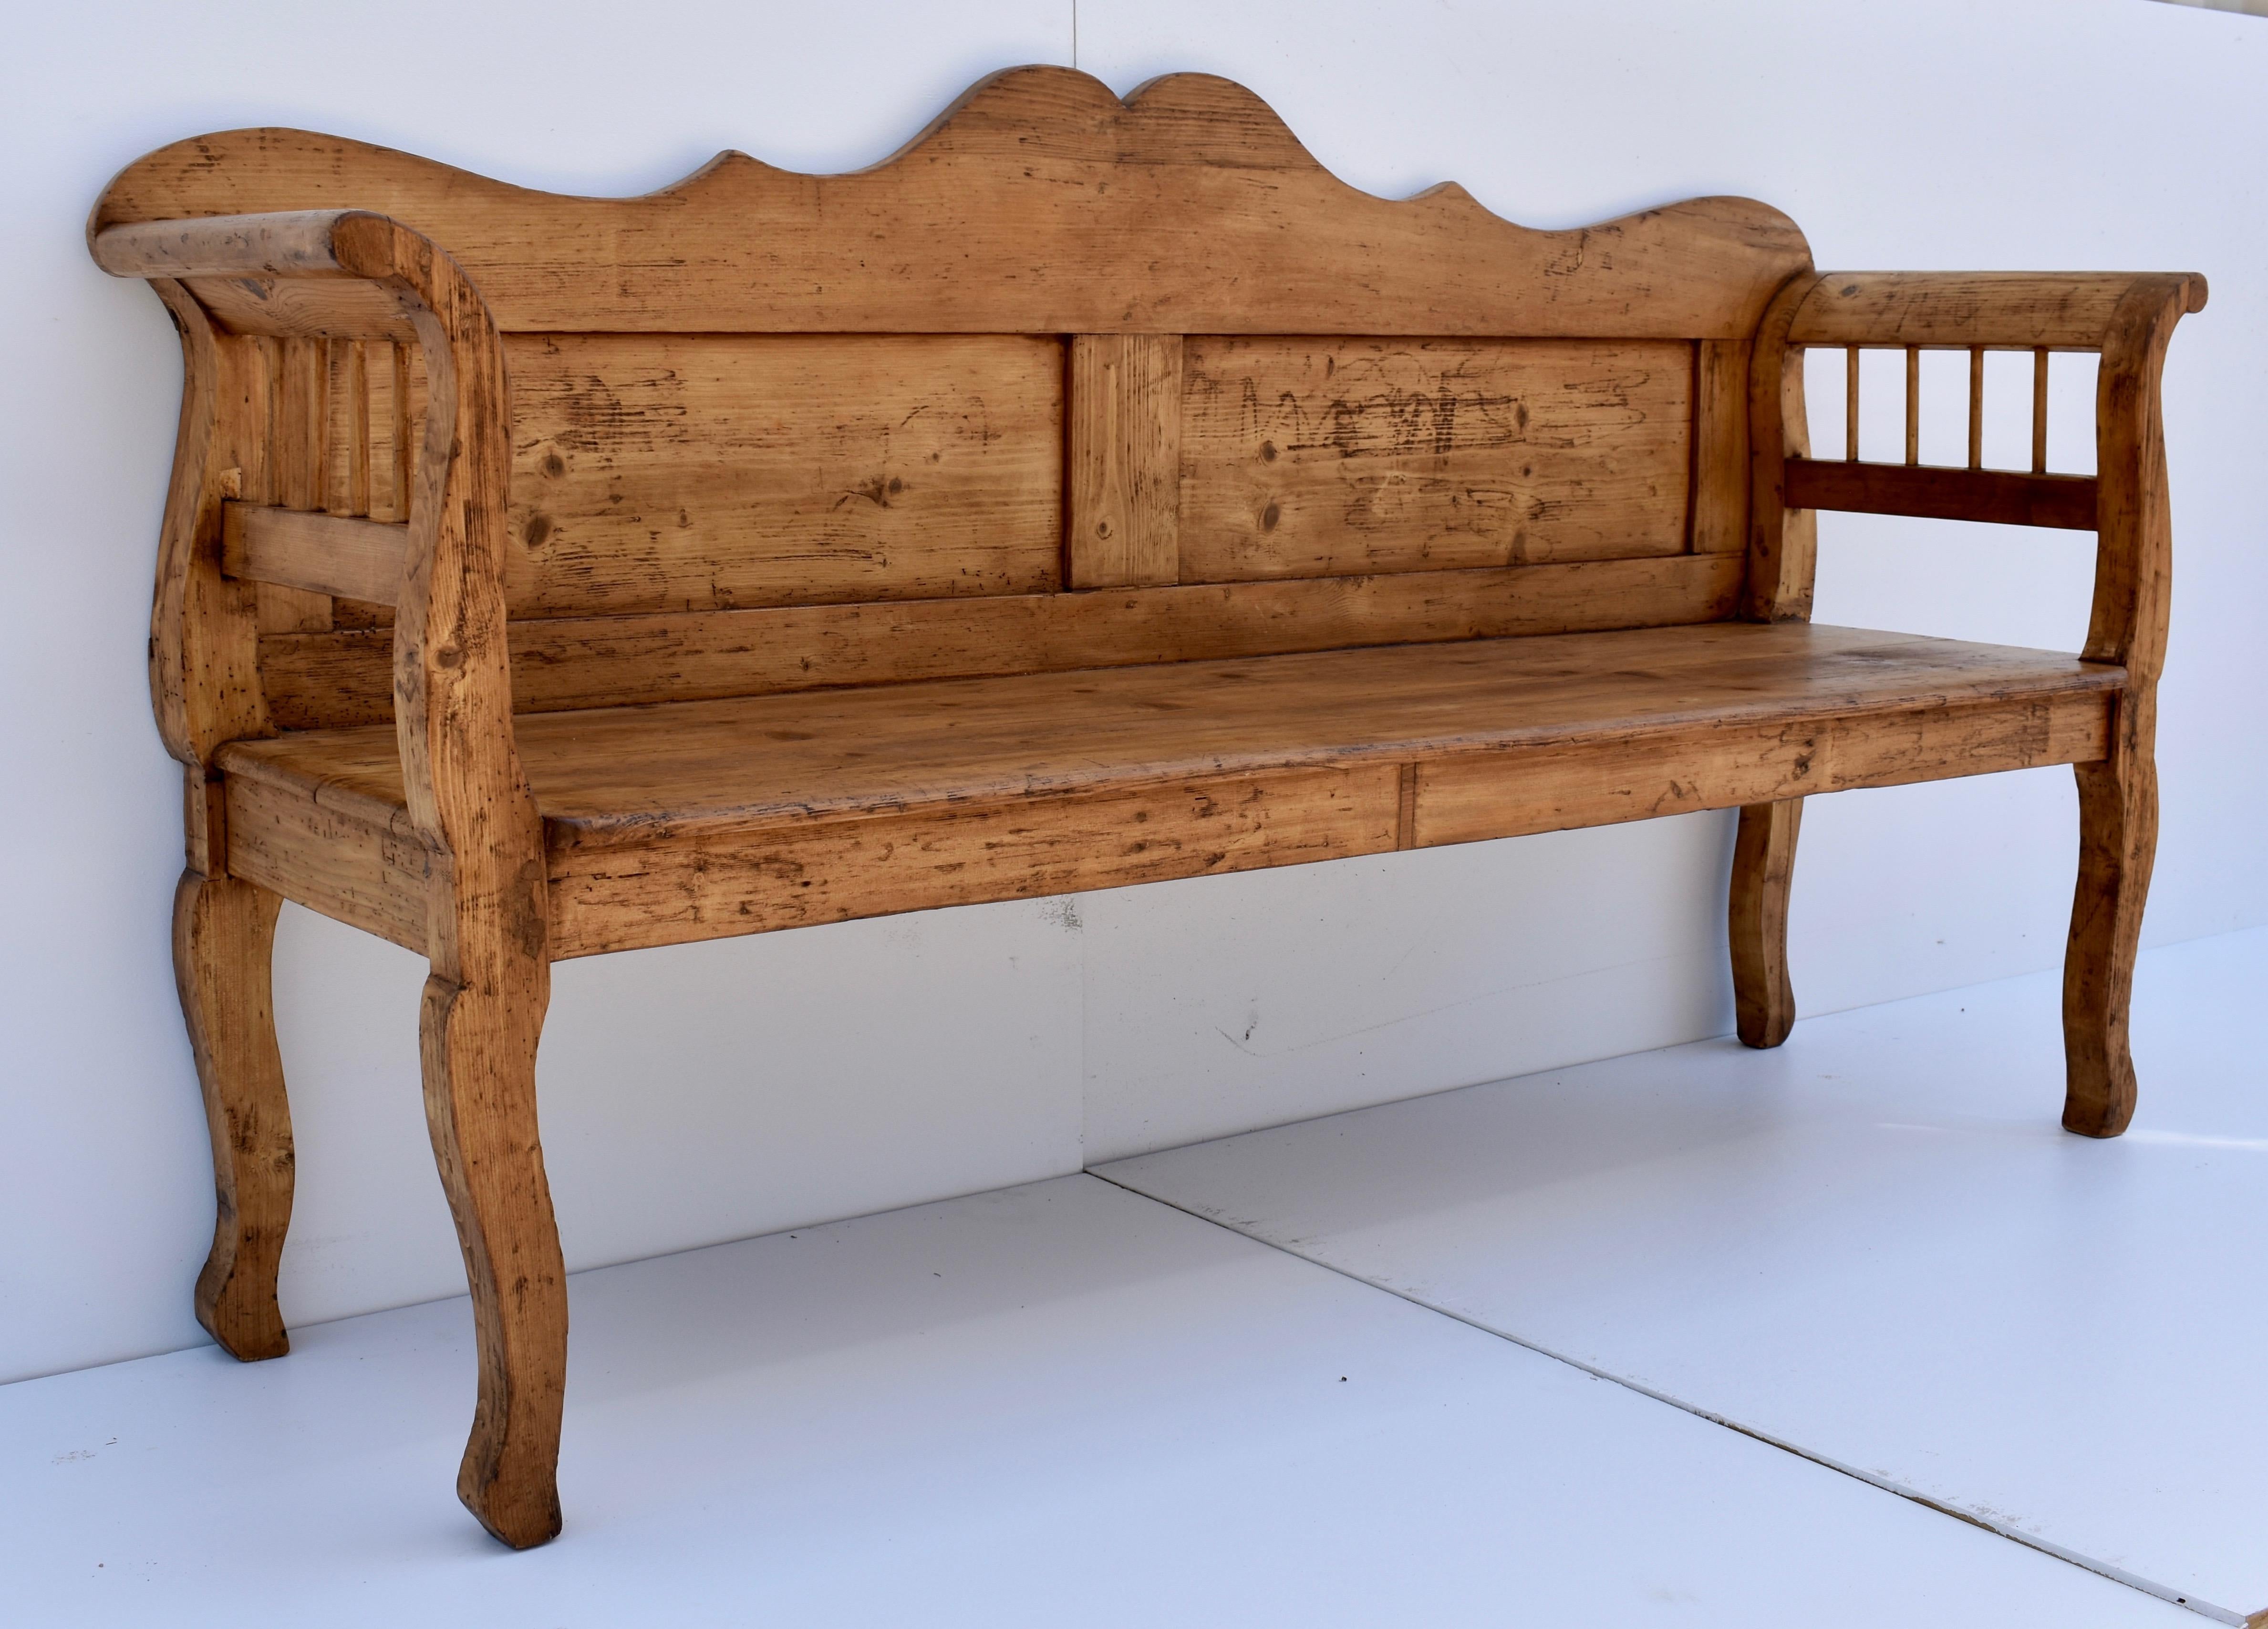 This shapely pine bench or settle has a scalloped top rail to the back, above two enclosed flat panels. The integral arms and legs have a beautiful curvilinear form and incorporate a row of turned spindles. The deep seat is firm and comfortable.